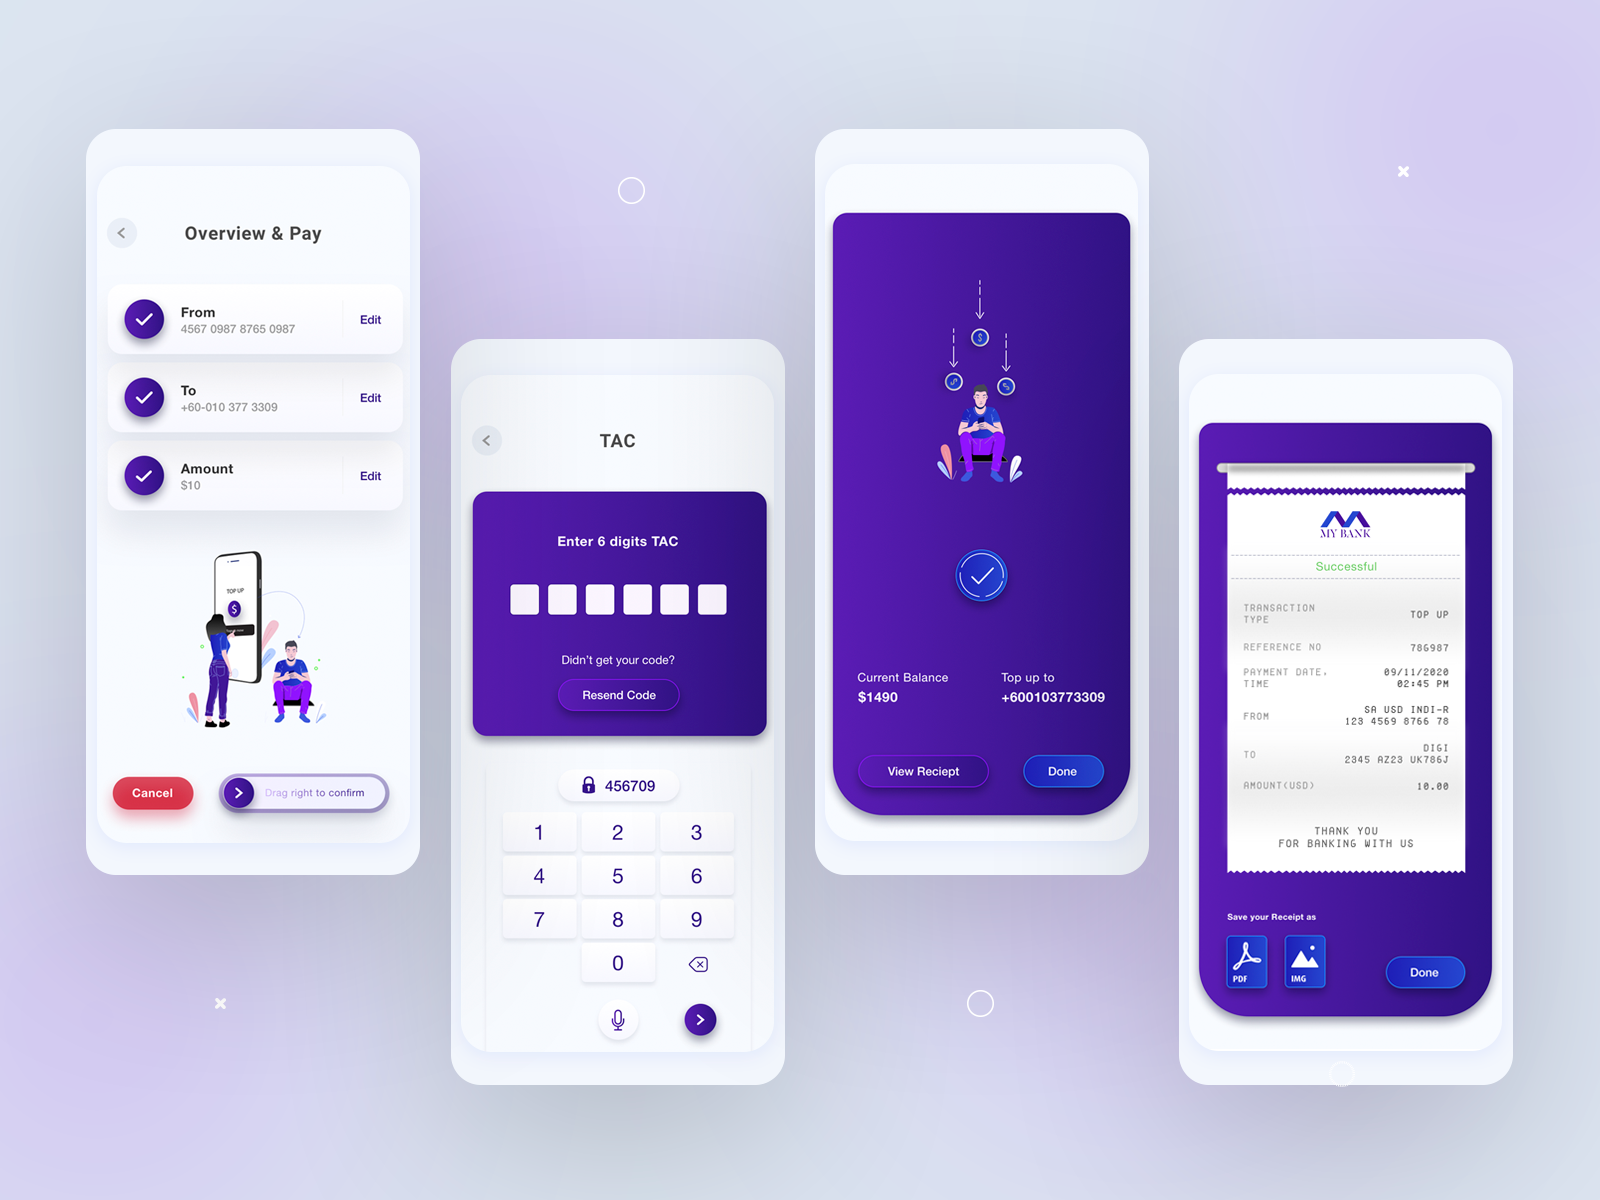 Top process for bank part 3 by Tanfa on Dribbble